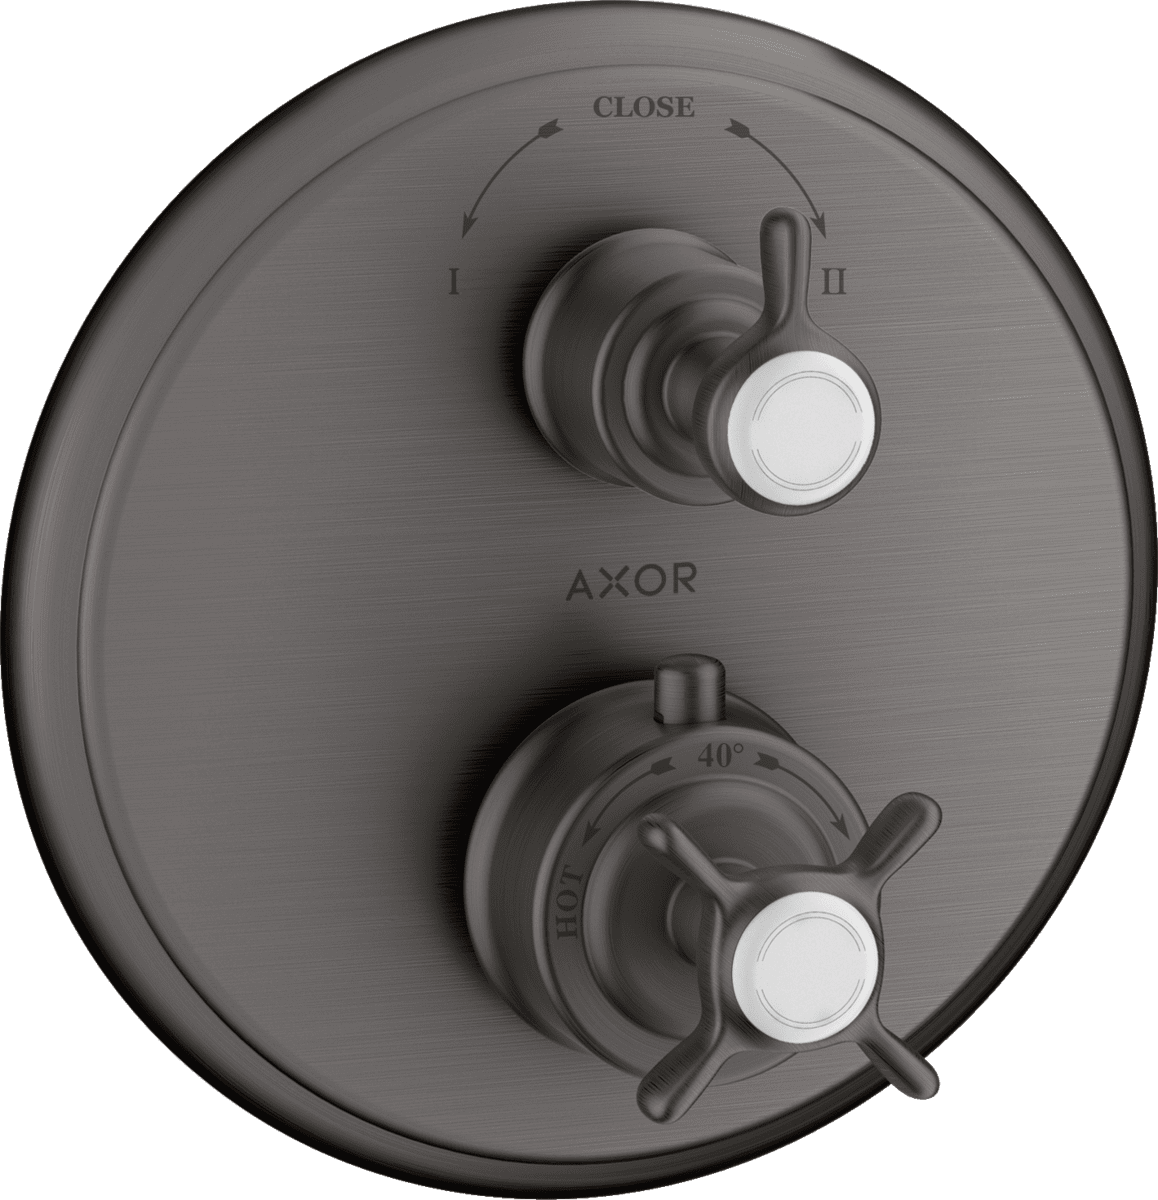 Picture of HANSGROHE AXOR Montreux Thermostat for concealed installation with cross handle and shut-off/ diverter valve #16820340 - Brushed Black Chrome